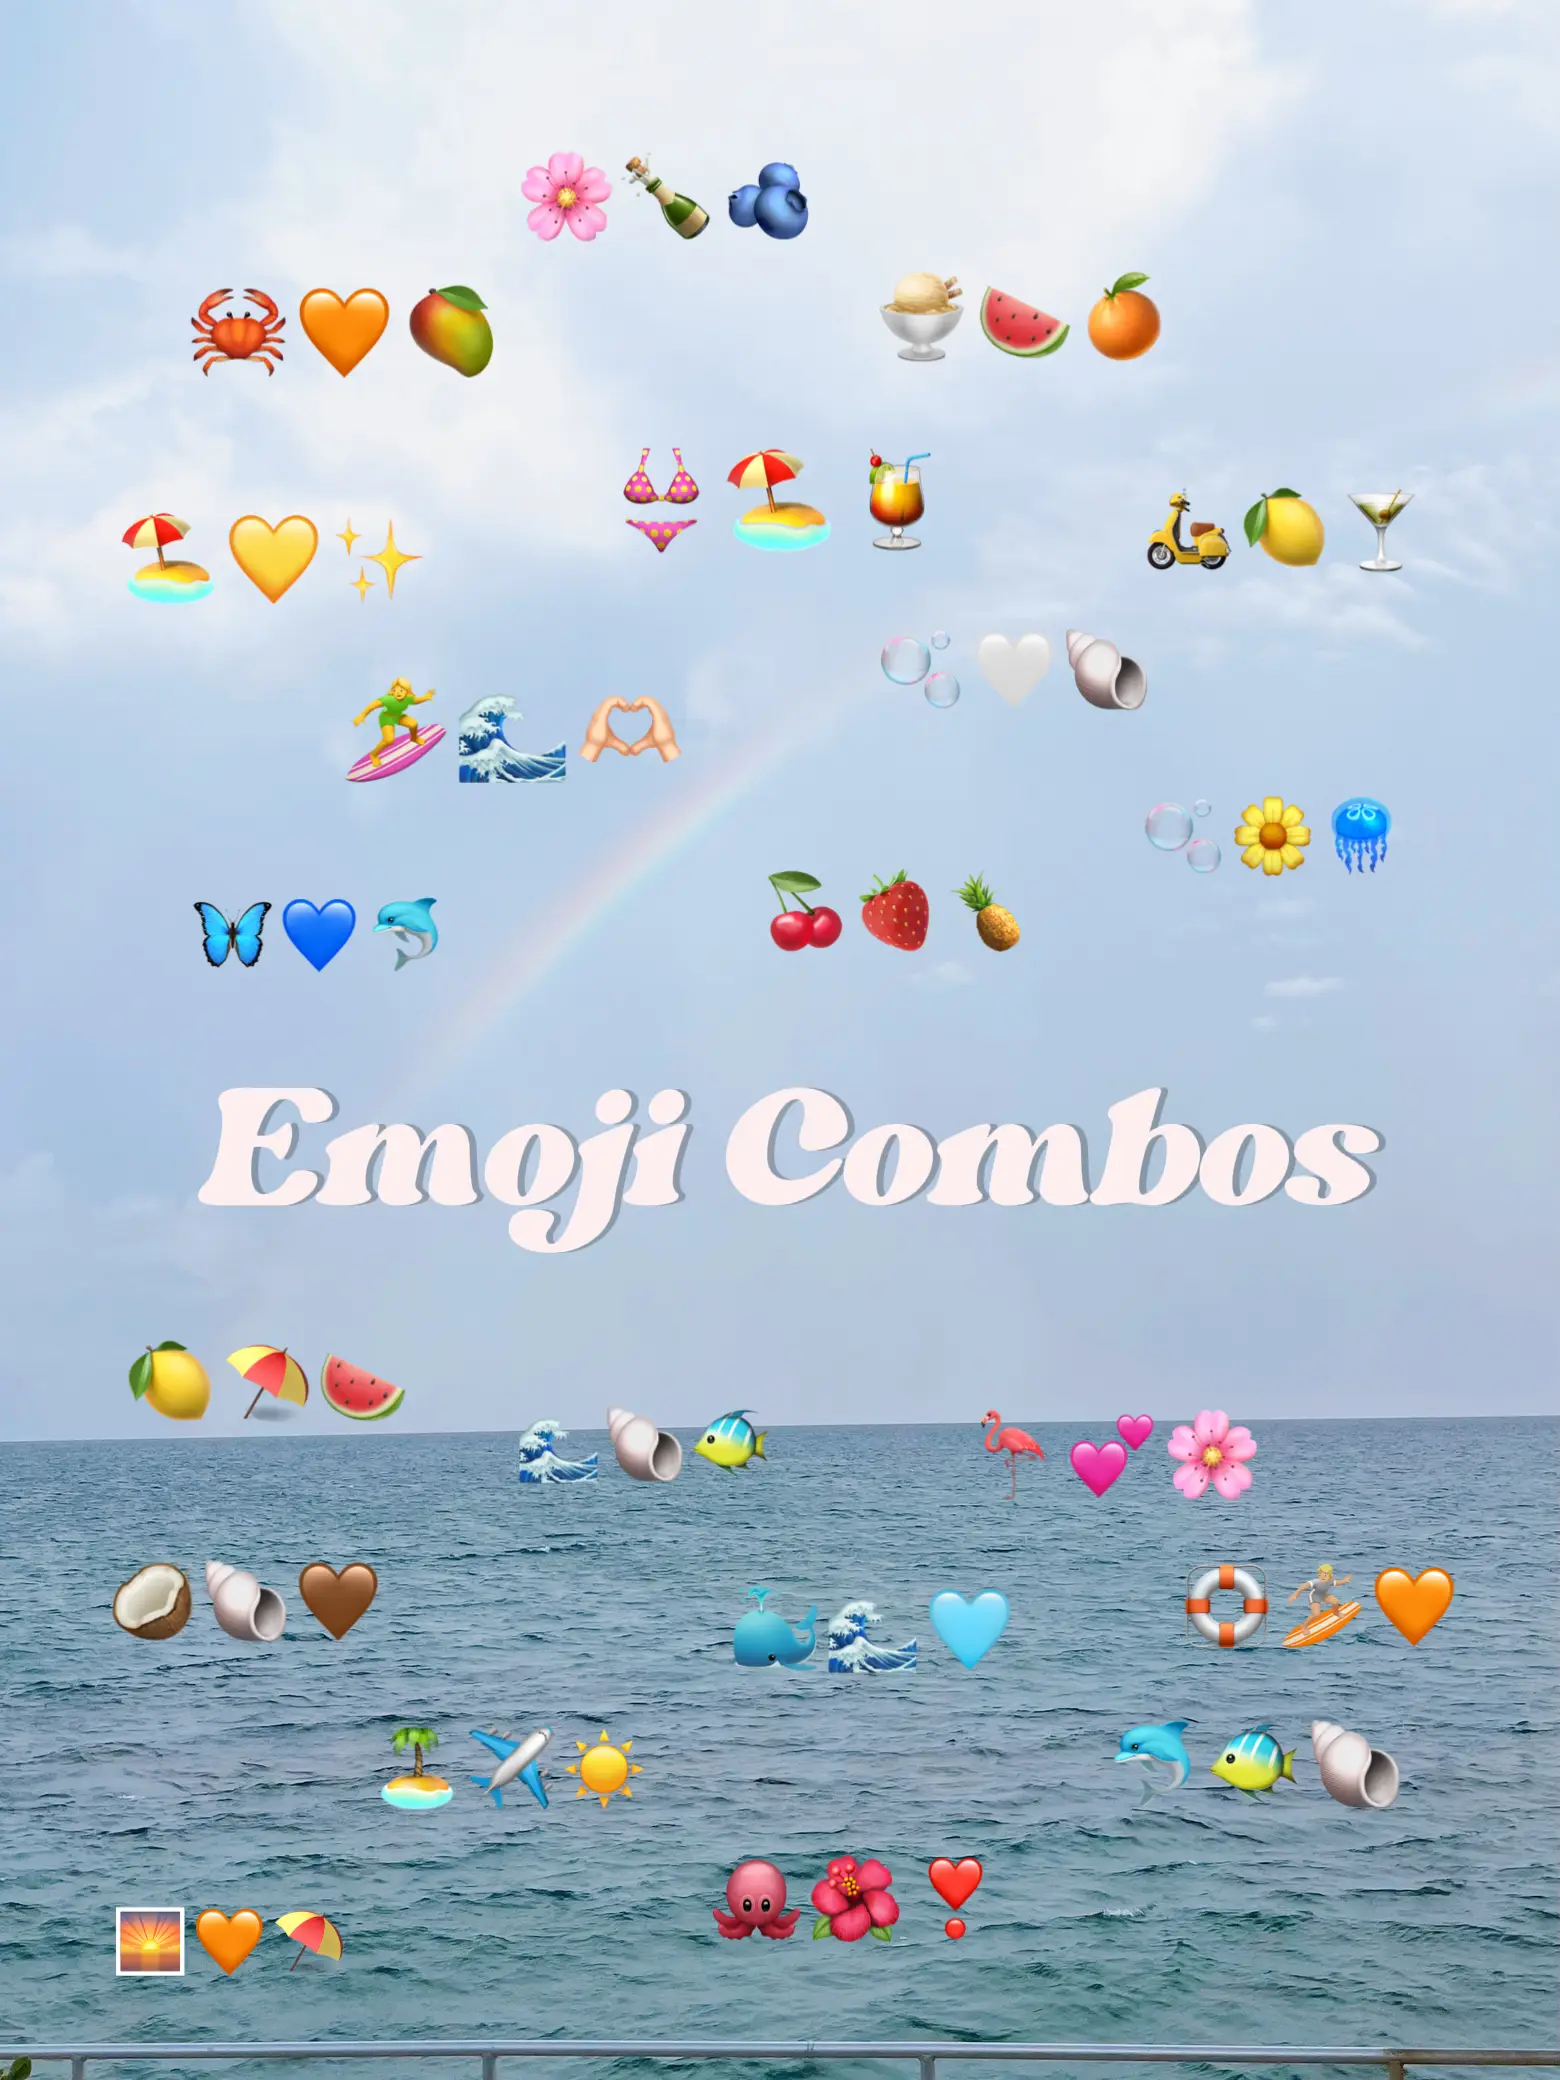  A collection of emoji's and emojis on a beach.